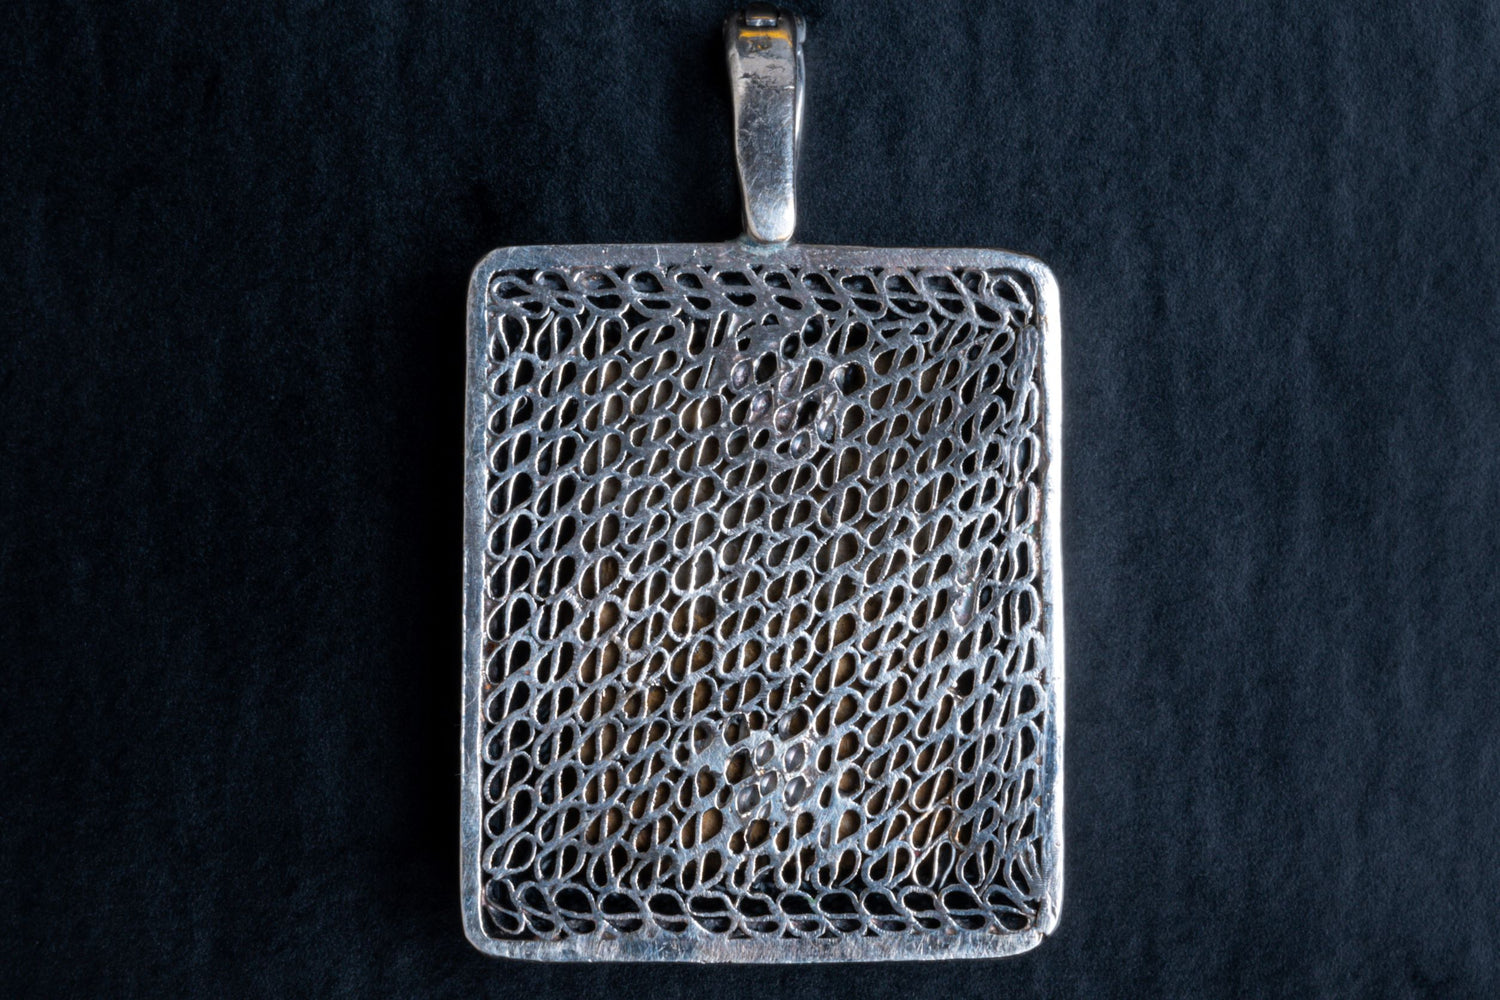 Antique Silver and Ivory Miniature Pendant - Pretty Different Shop